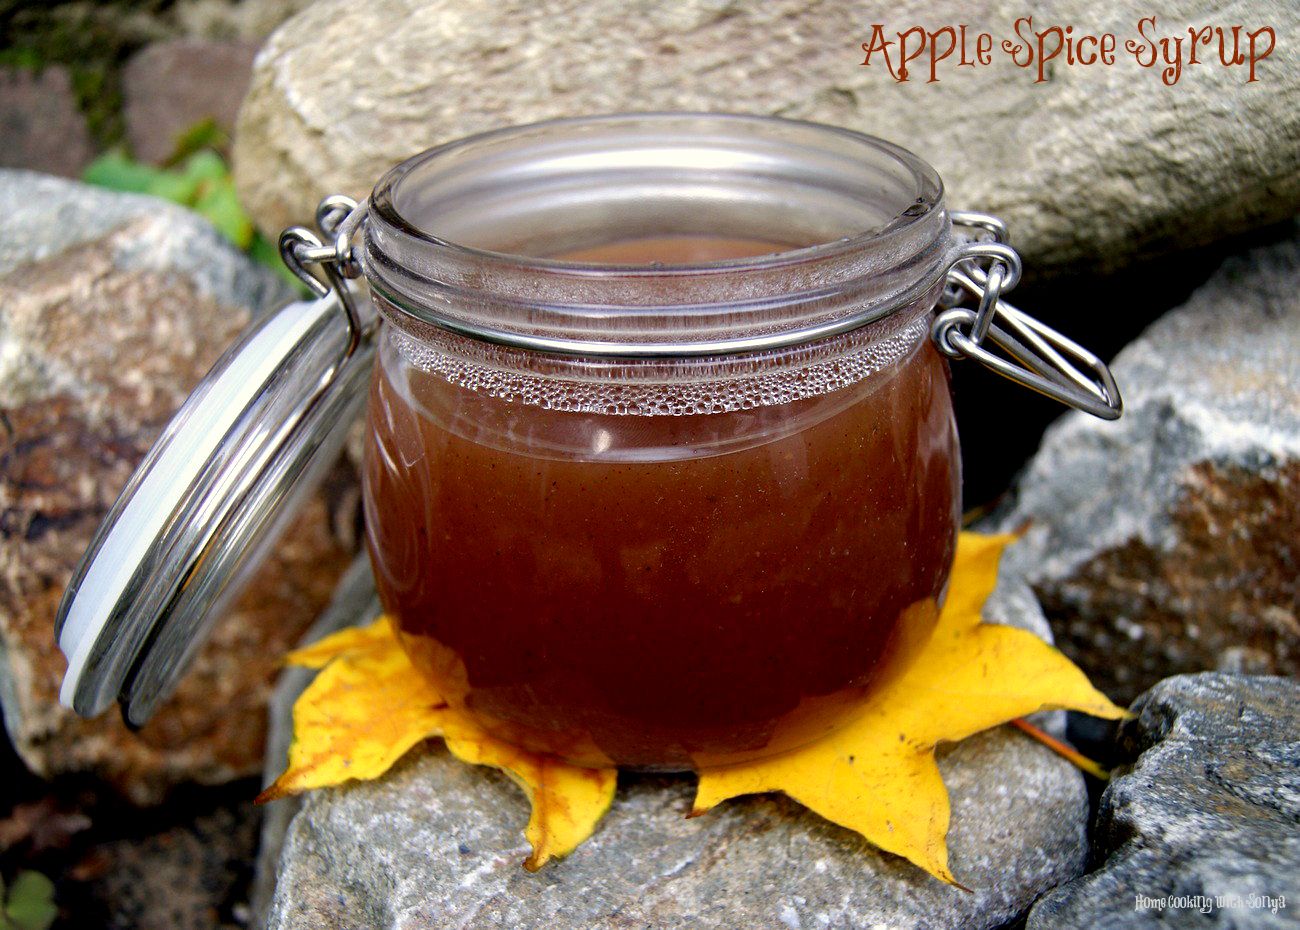 8-10, Apple Spice Syrup..Breakfast just got better :)